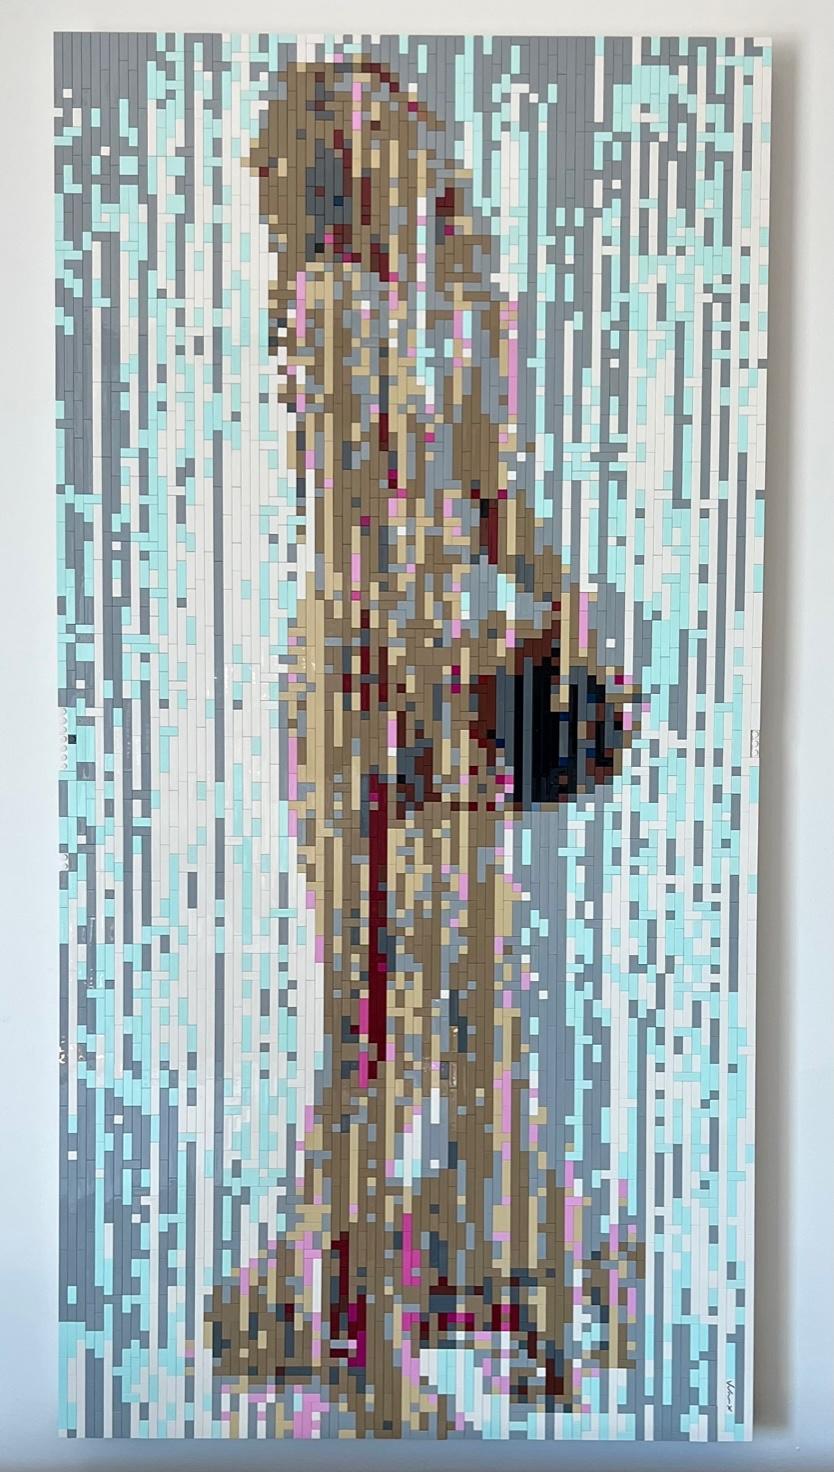 figurative contemporary pop art flat lego wall sculpture, pixel nude color - Mixed Media Art by Andre Veloux